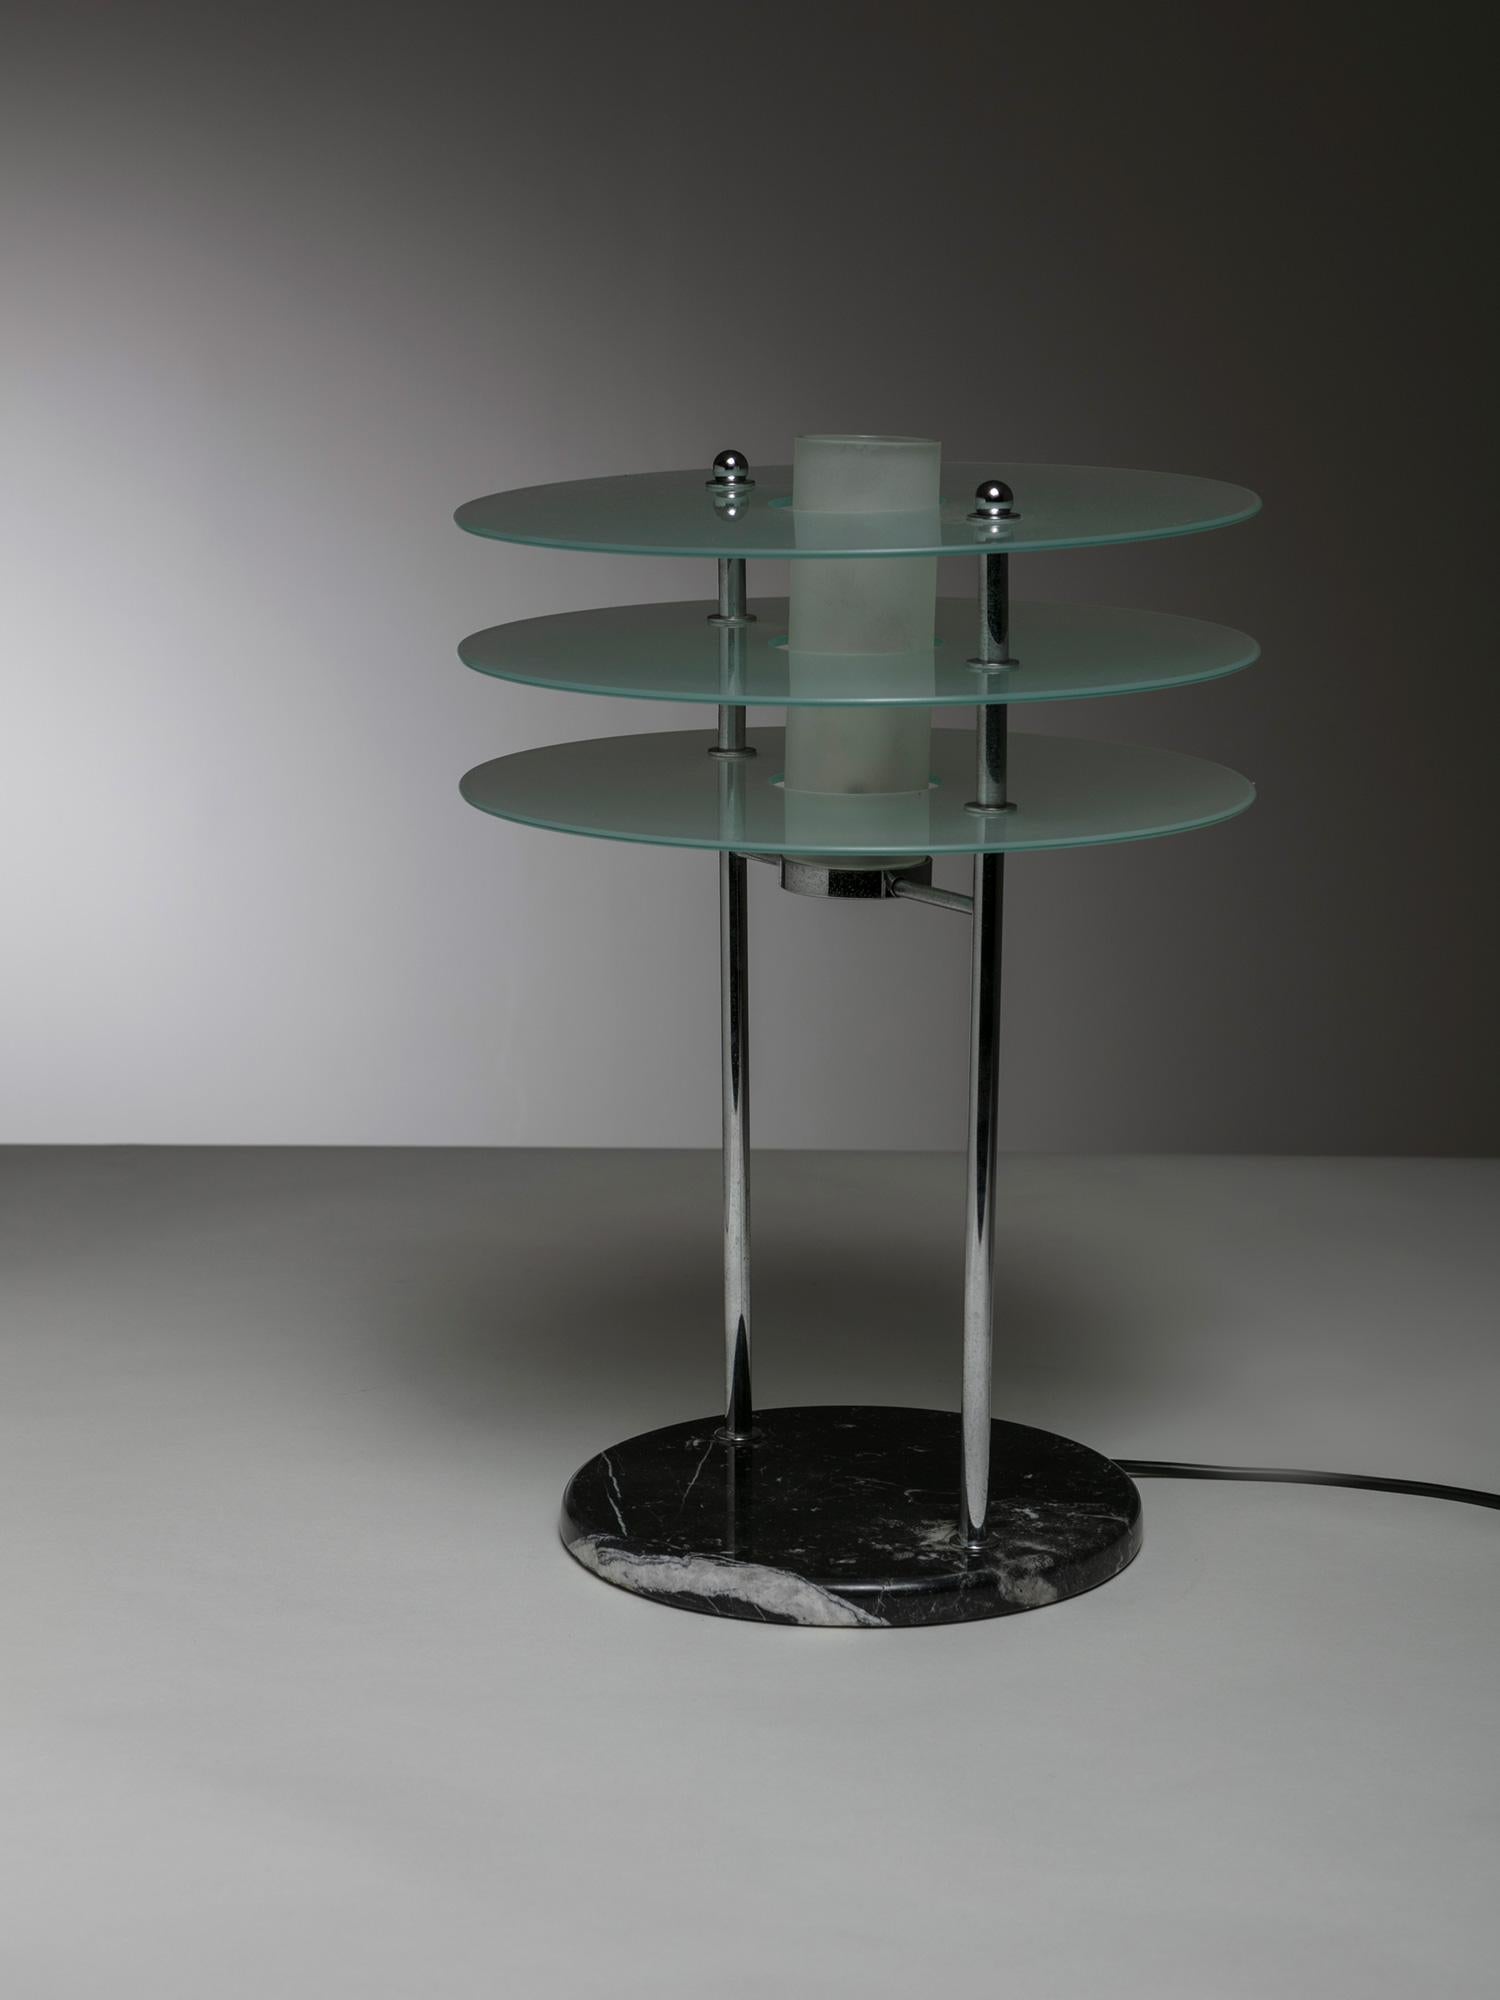 Libra table lamp by Roberto Volonterio and Cesare Benedetti for Quattrifolio.
Ethereal lamp composed by three sandblasted glass discs, black marble base and chrome frame.